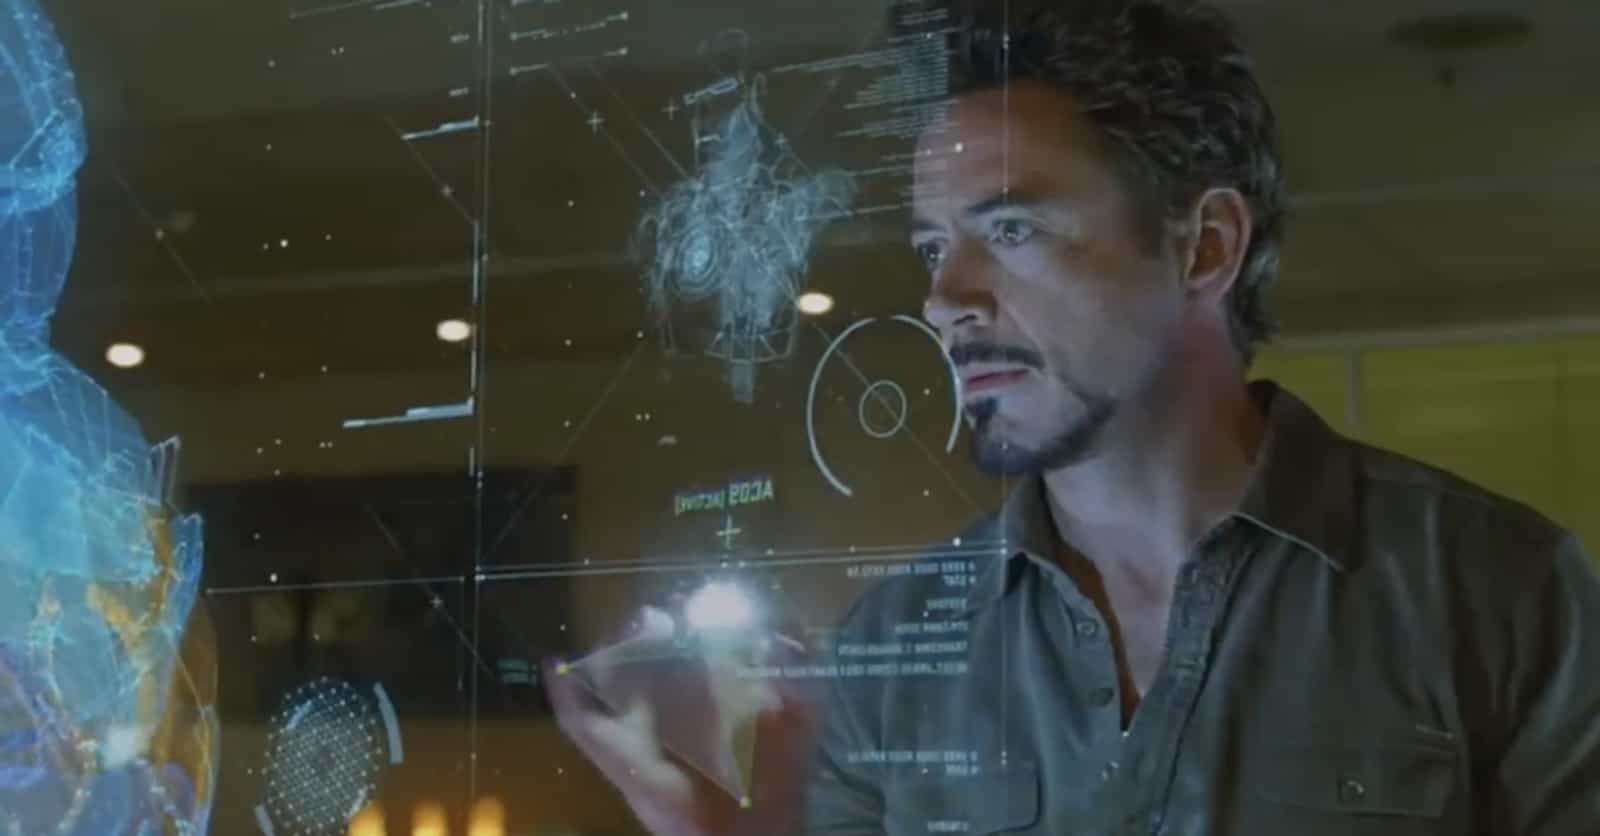 Small But Poignant Details About Iron Man That Fans Noticed